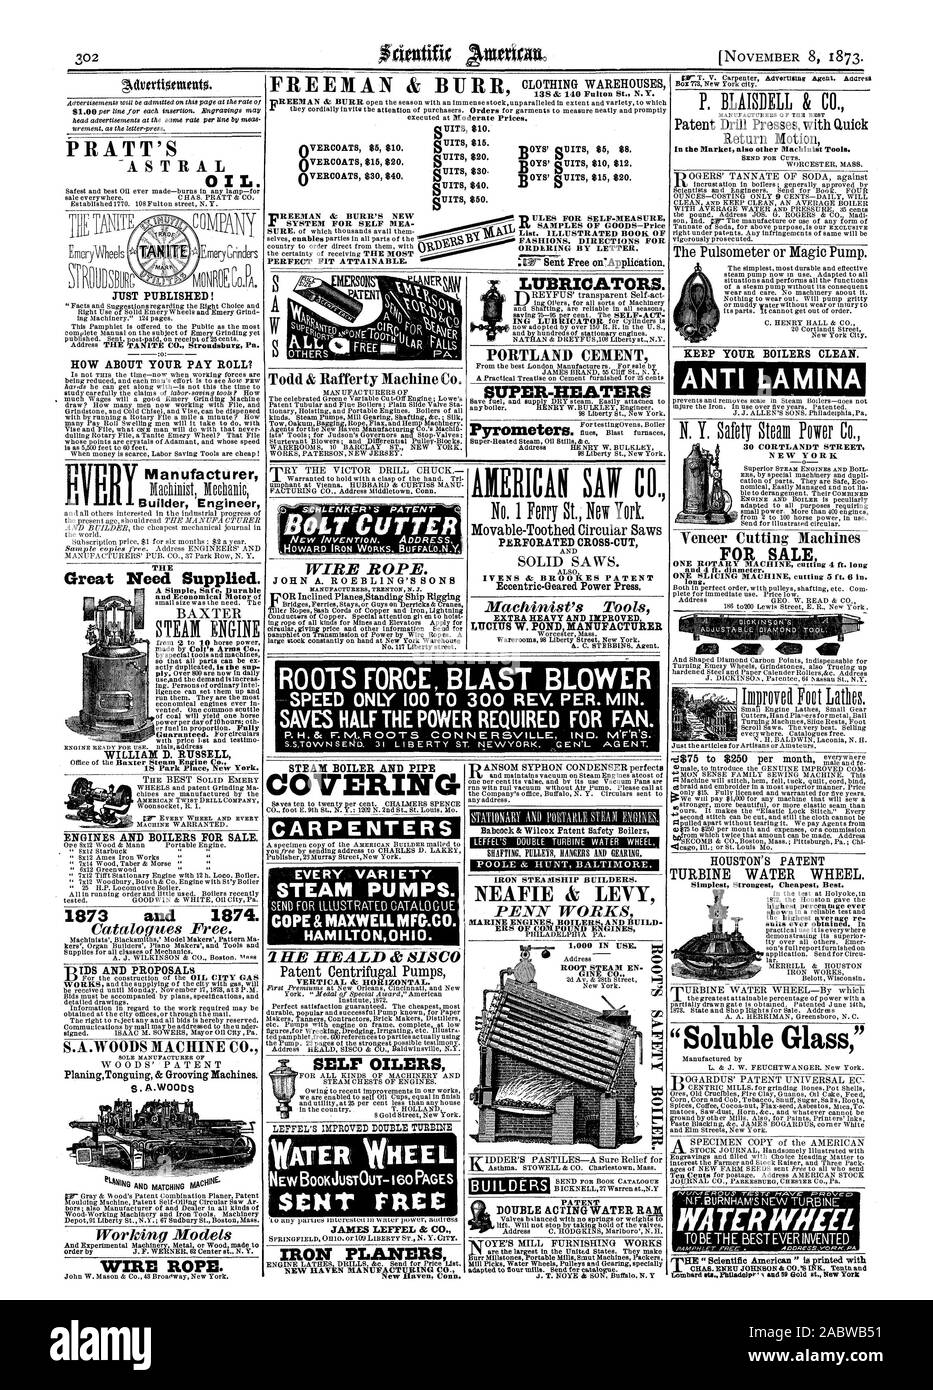 Sent Free on'Application. PRATT'S OIL. JUST PUBLISHED! HOW ABOUT YOUR PAY ROLL? Builder Engineer Manufacturer Great Need Supplied. WILLIAM D. RUSSELL ENGINES AND BOILERS FOR SALE. 1873 and 1874. PlaningTonguing & Grooving Machines. S. A.WOODs WIRE ROPE. TEN  BOLT CUTTER WIRE ROPE. STEAM BOILER AND PIPE ITERIN CARPENTERS EVERY VARIETY STEAM PUMPS. COPE & MAXWELL MFG.CO. HAM I LTO N OHIO. SELF OILERS WATERK WHEEL SCNT Etter. JAMES LEFFEL & IRON PLANERS SUPER-HEATERS PERFORATED CROSS-CUT Eccentric-Geared Power Press. LUCIITS W. POND MANUFACTURER NEAFIE & LEVY PENN WORKS ERS OF COMPOUND ENGINES Stock Photo